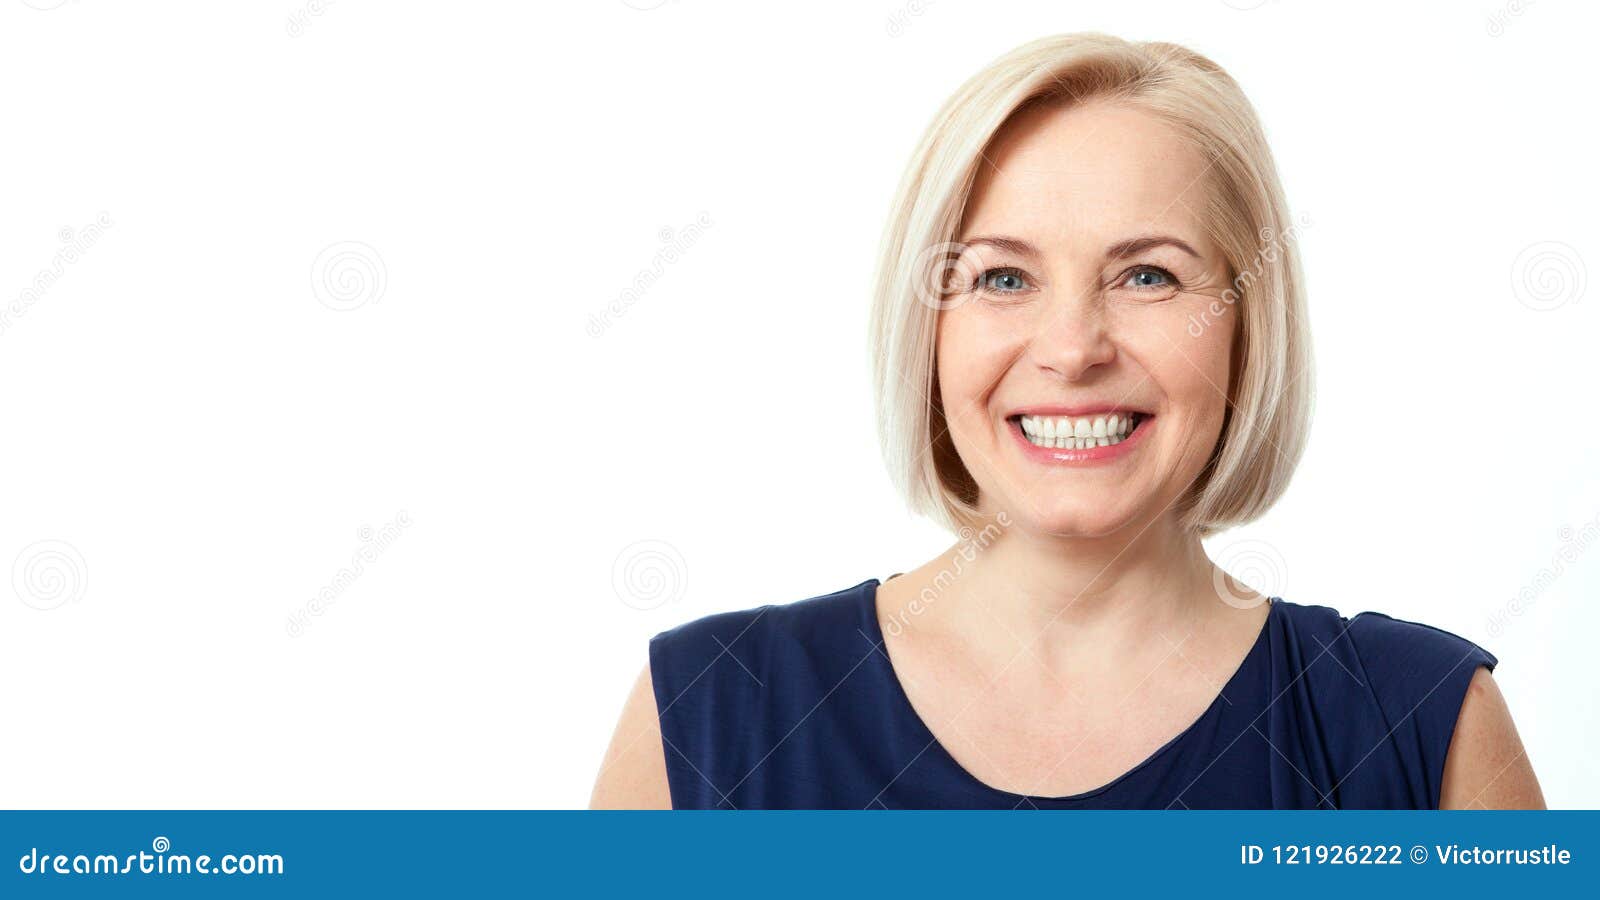 https://thumbs.dreamstime.com/z/attractive-middle-aged-woman-beautiful-smile-white-background-face-close-up-121926222.jpg